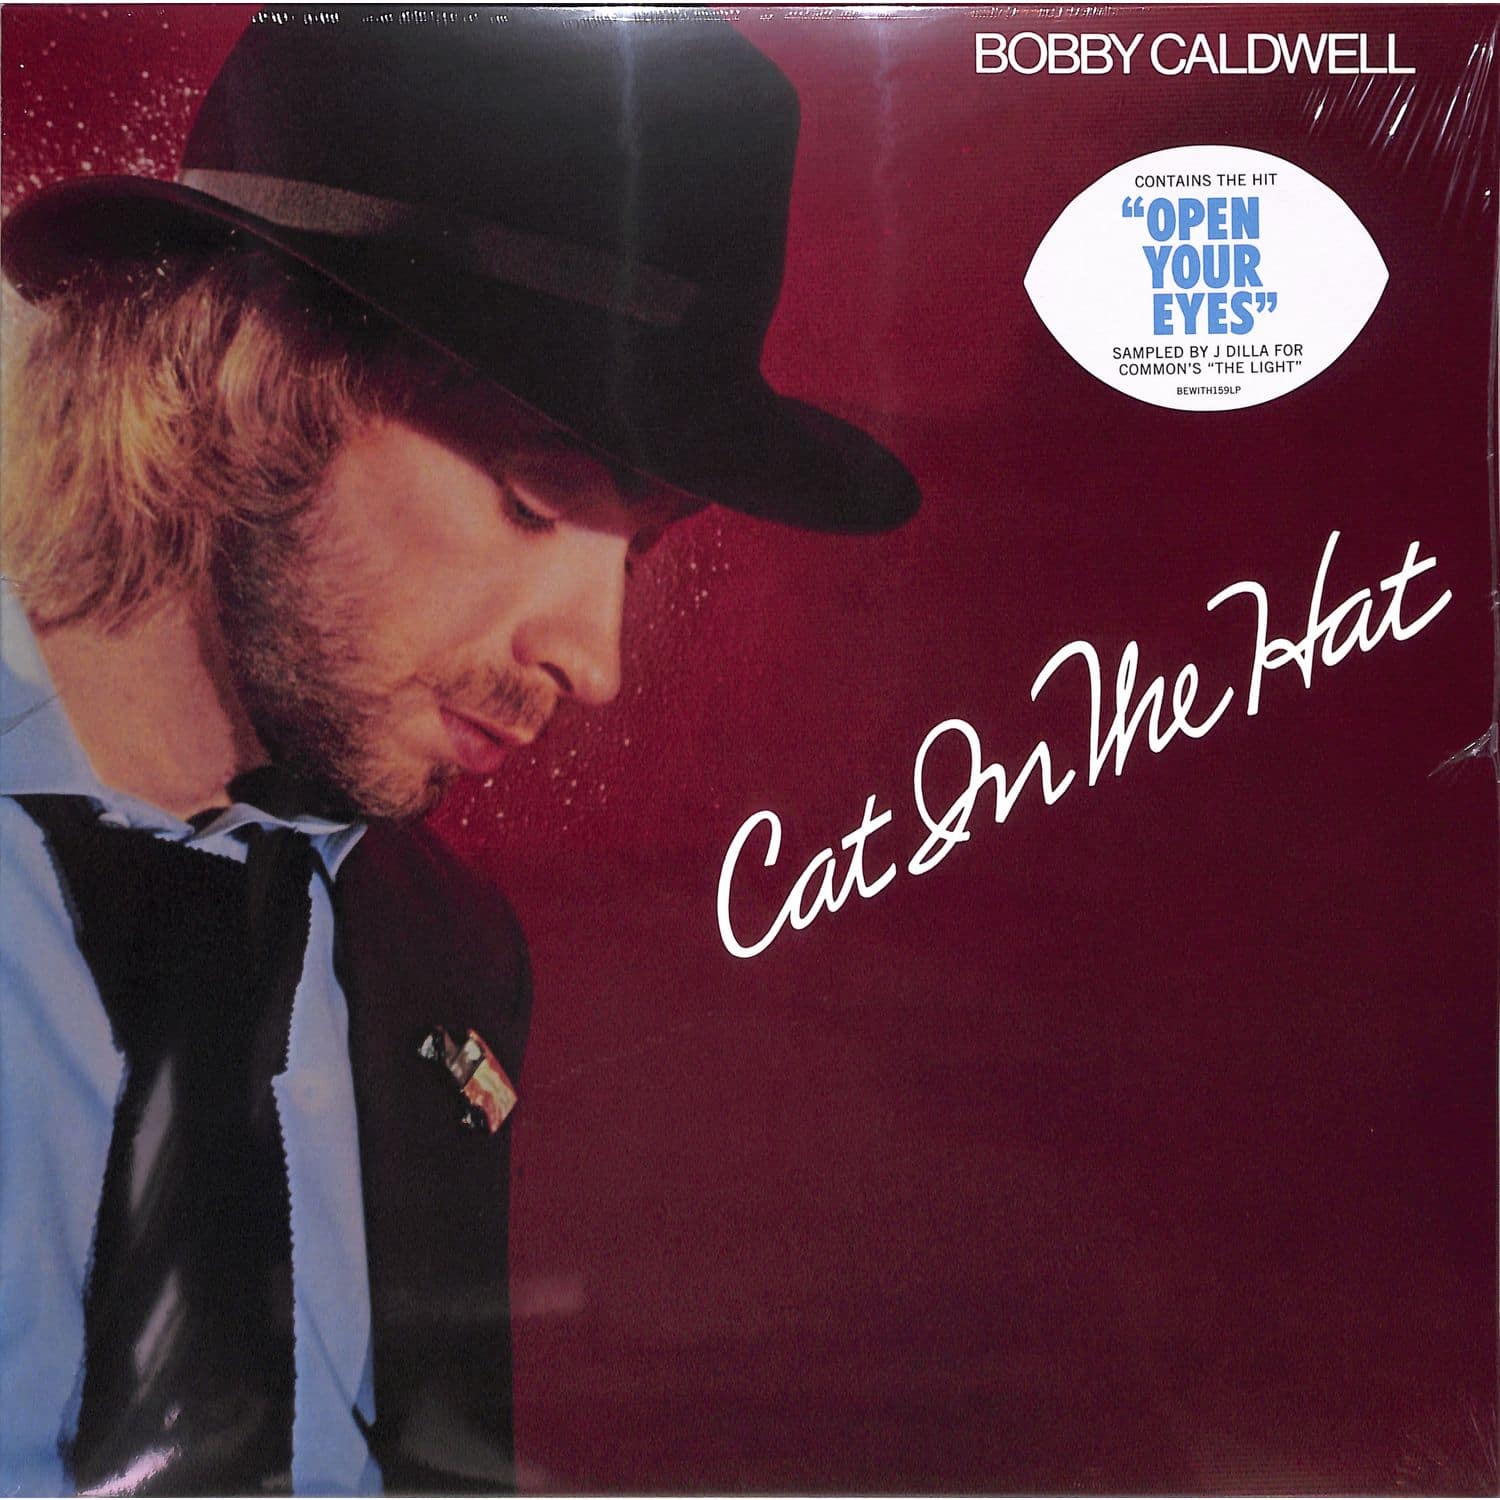 Bobby Caldwell - CAT IN THE HAT 